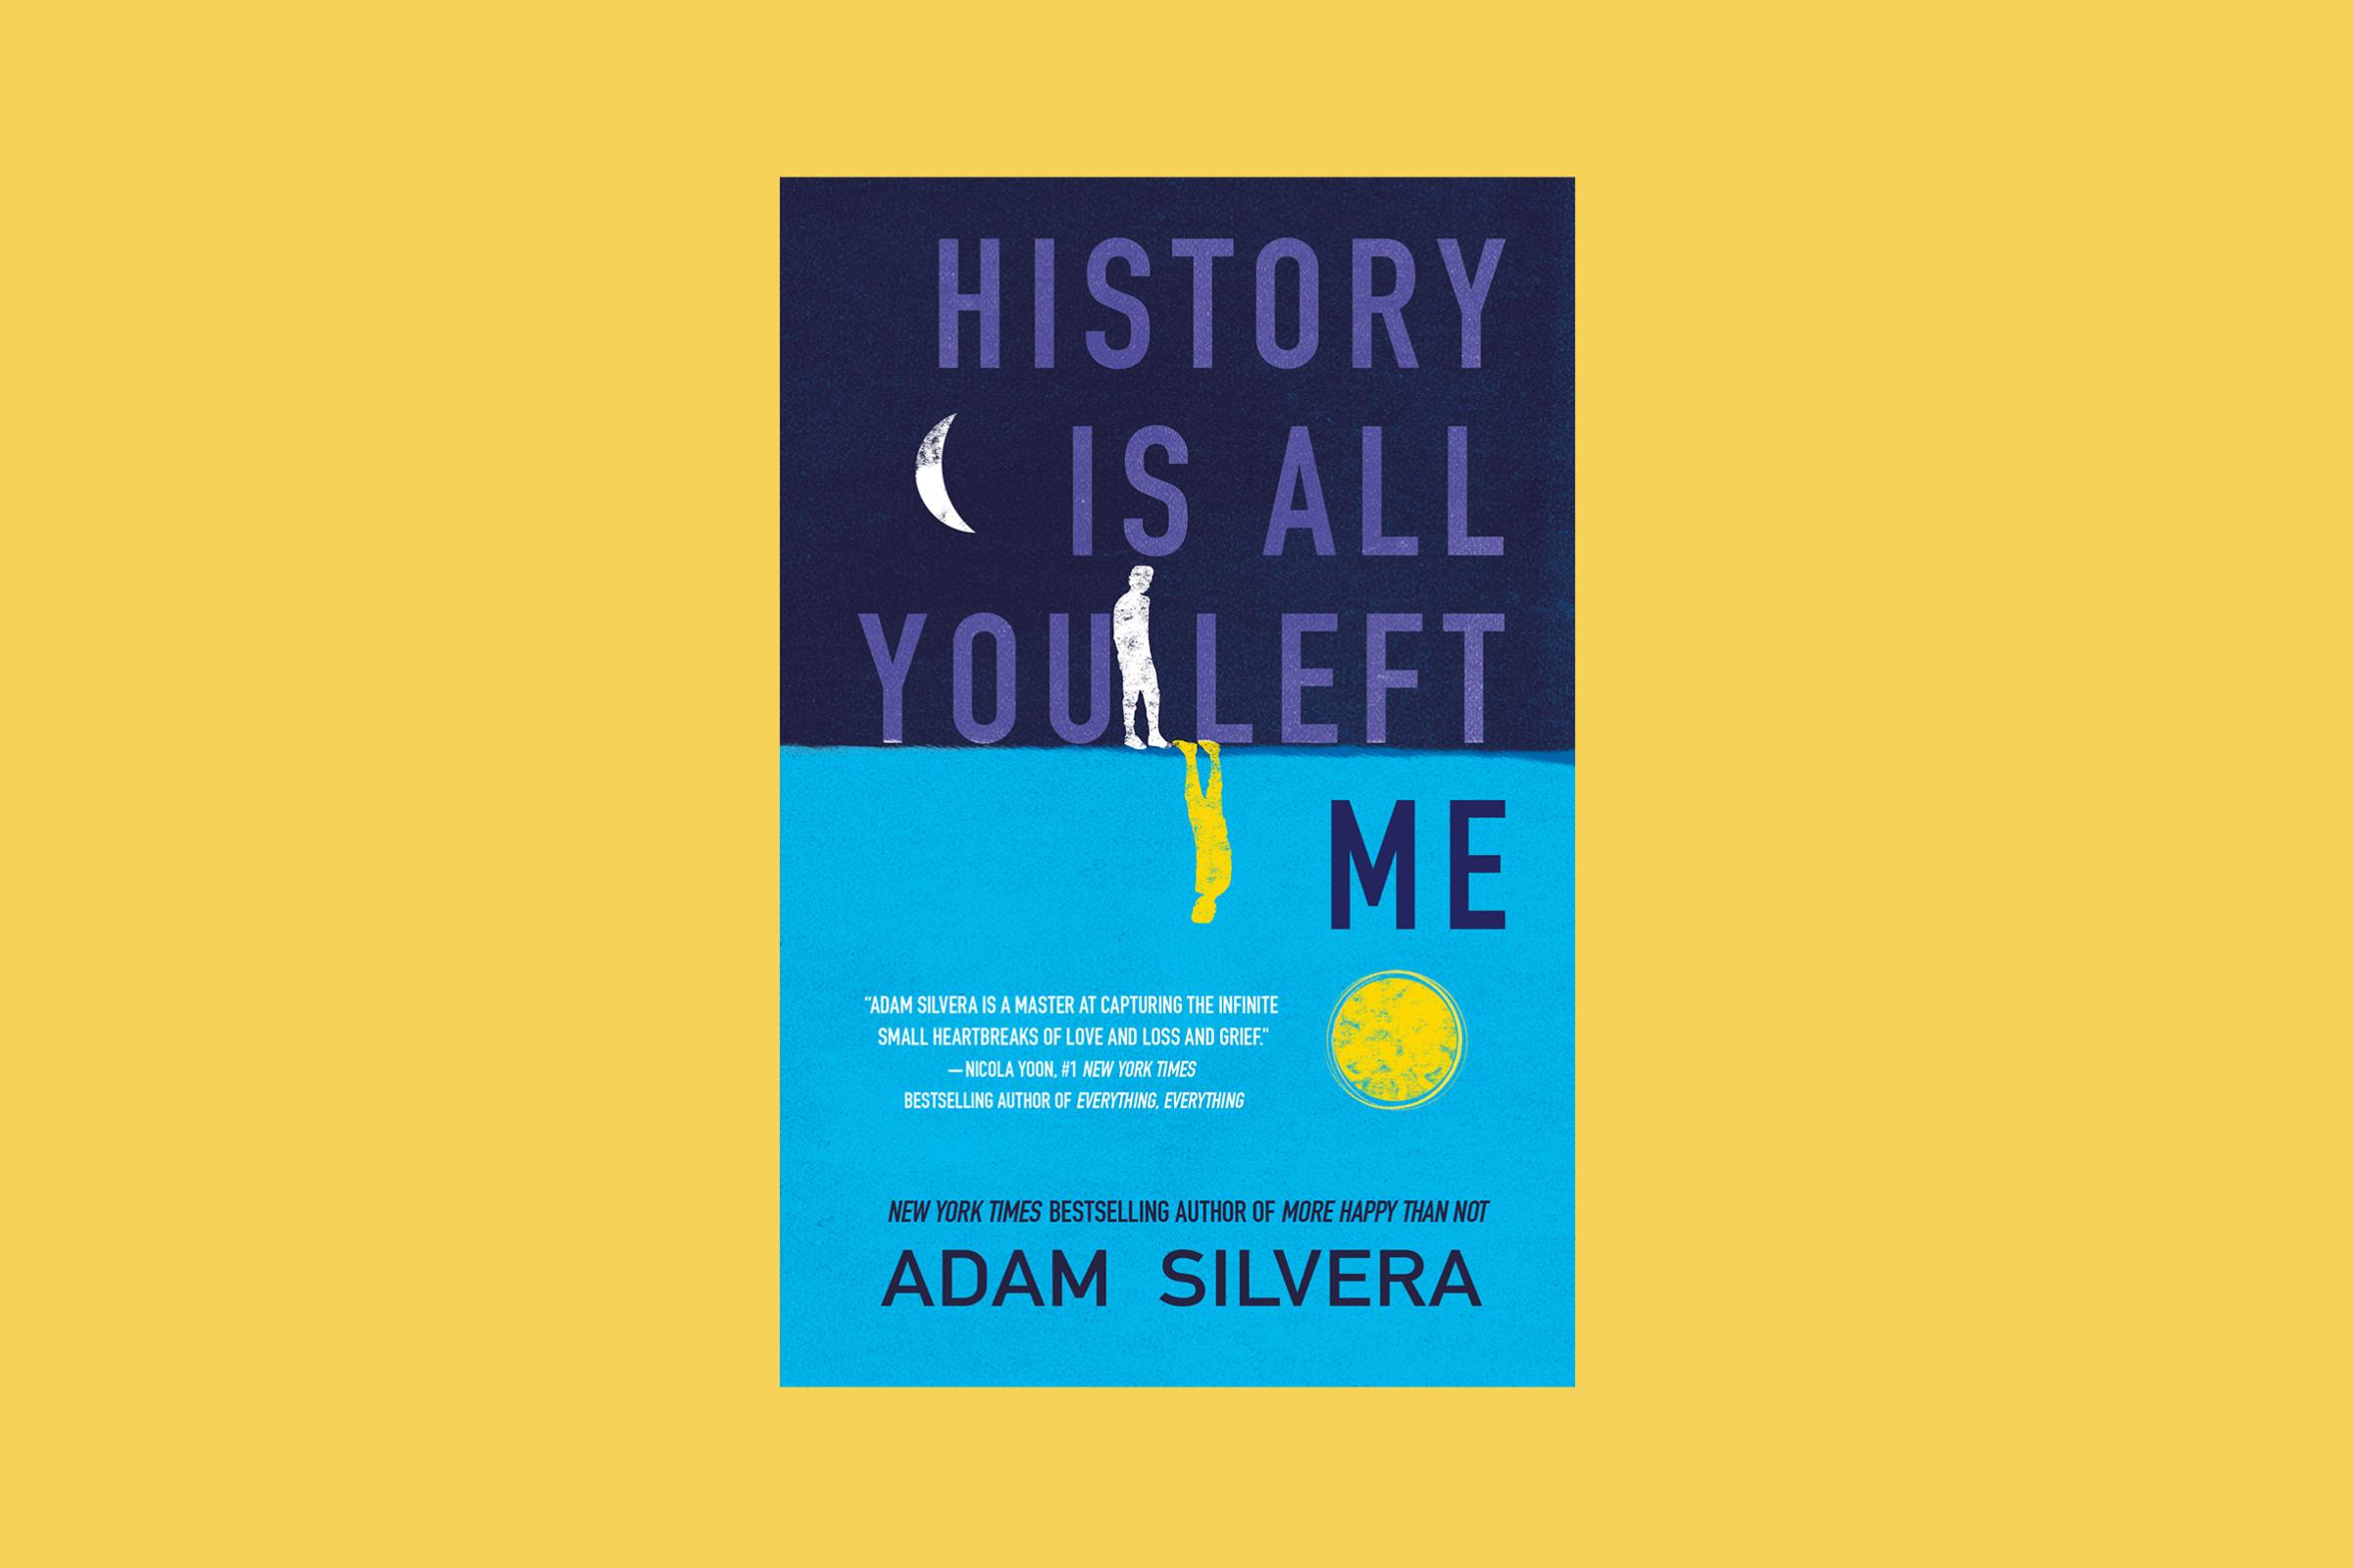 History Is All You Left Me is one of the 10 best young adult books of 2017